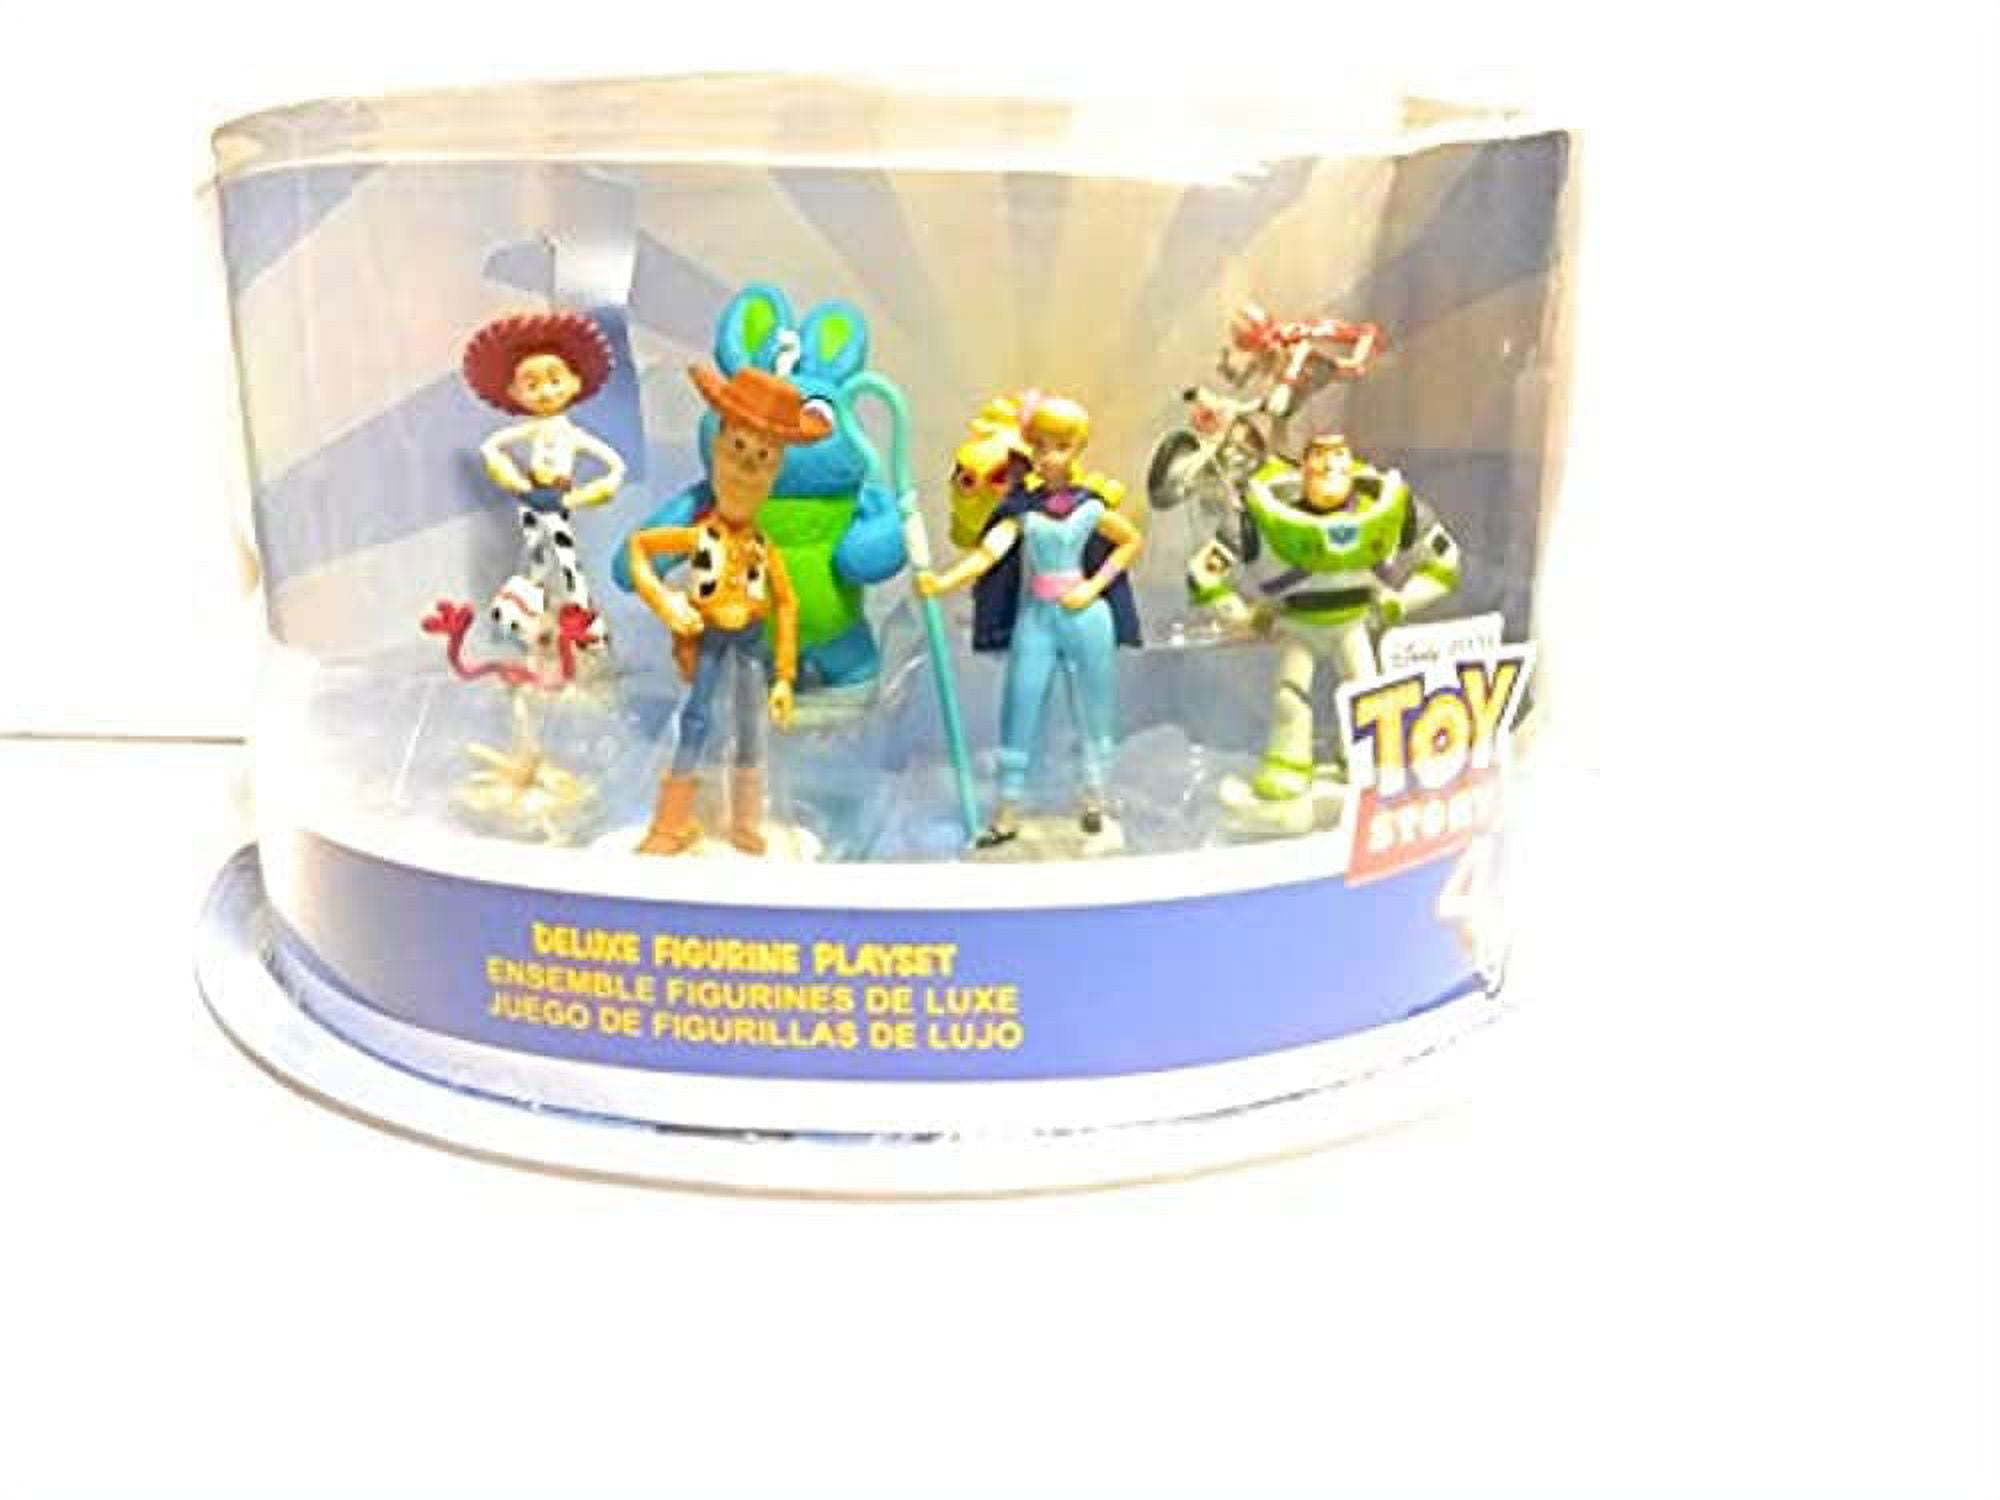 Toy Story Disney Collection 4 Deluxe Figurine playset 